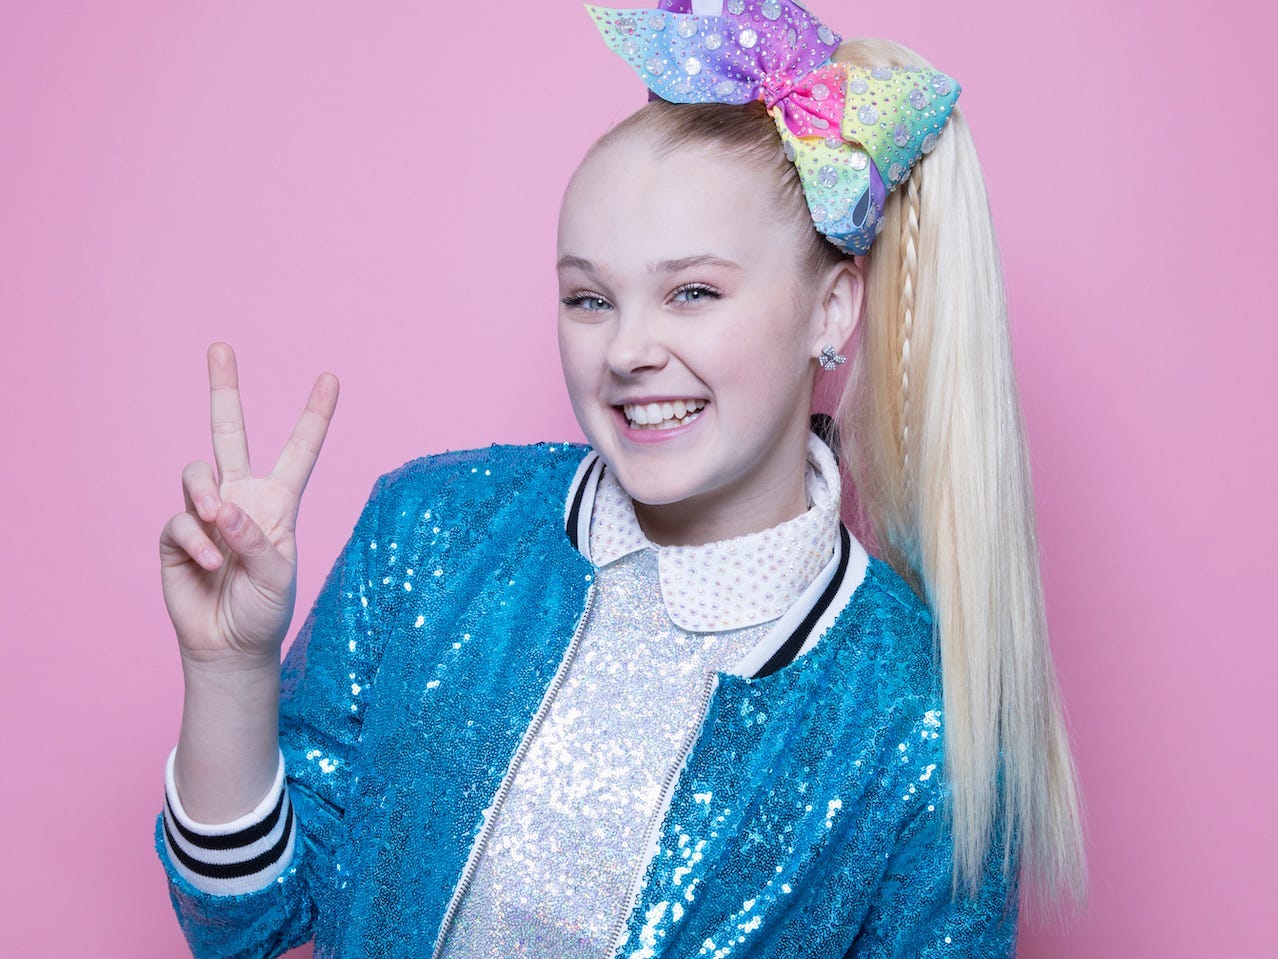 People scrutinizing JoJo Siwa's appearance are hurting young women in the  spotlight - and setting a terrible example for their younger fans